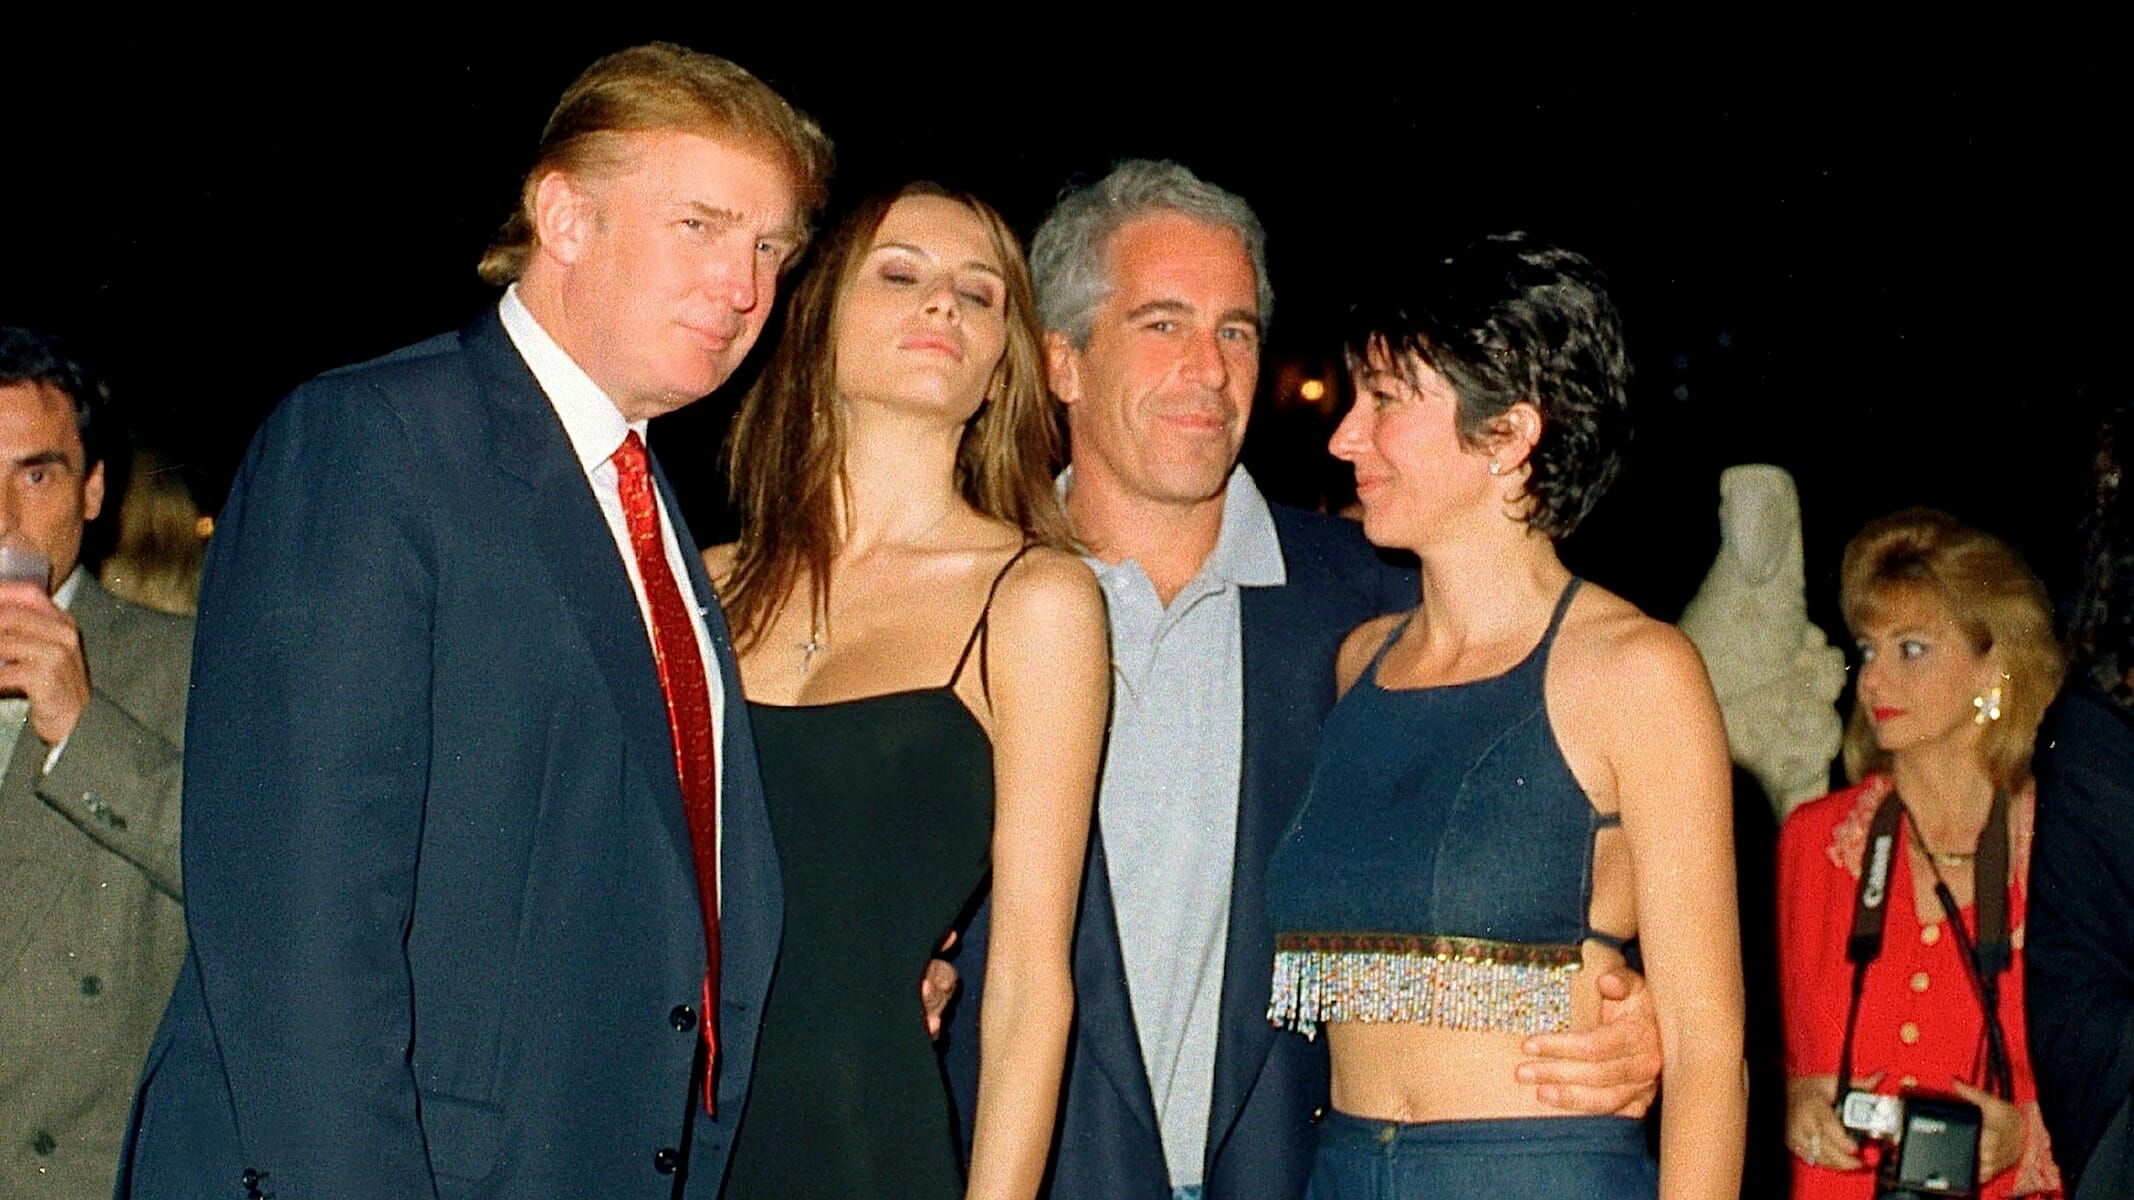 Epstein is Dead, But the Case Will Never Close